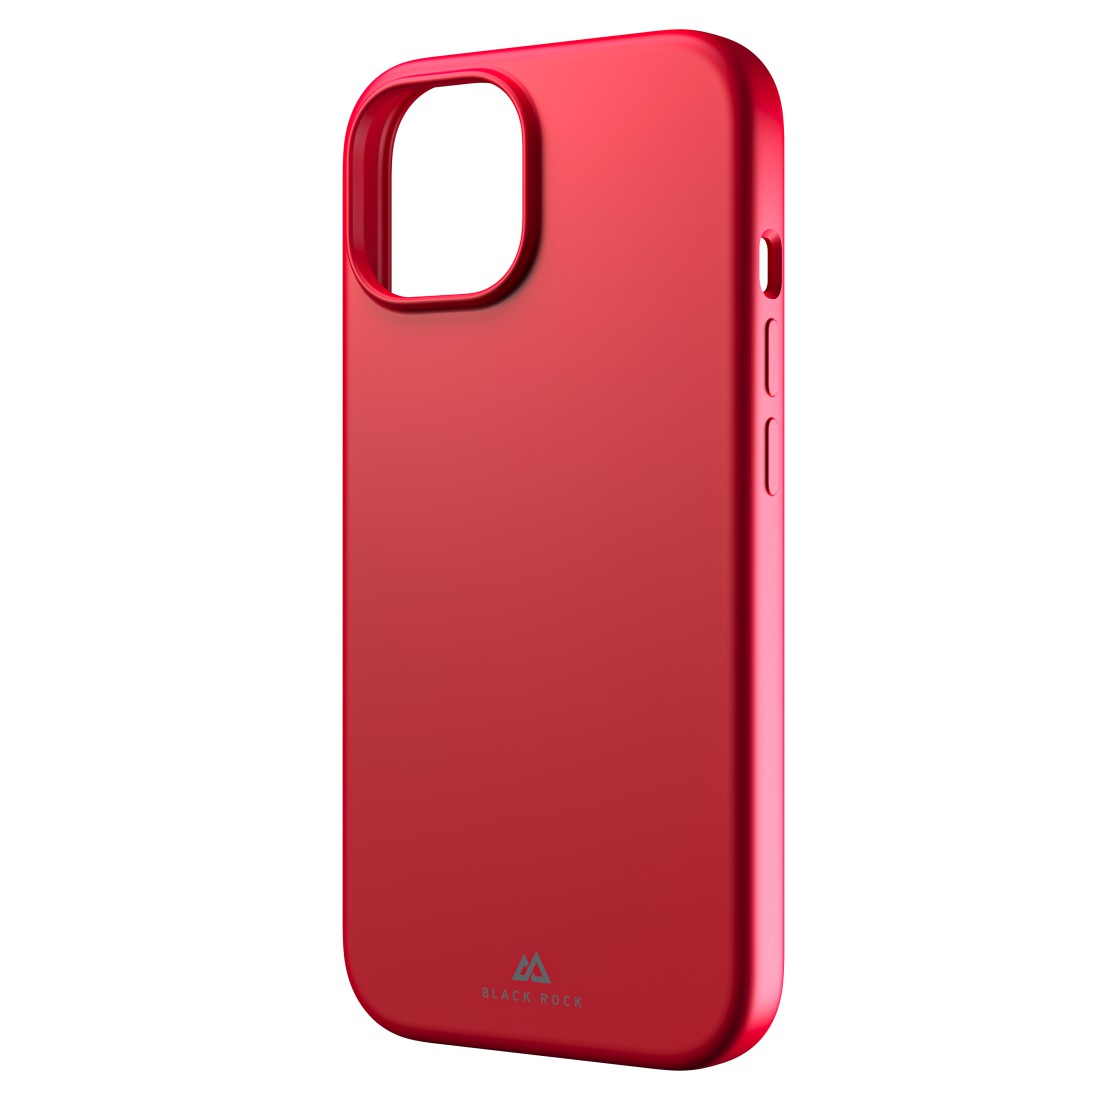 BLACK ROCK Mag Case, Rot 14, Urban iPhone Backcover, Apple